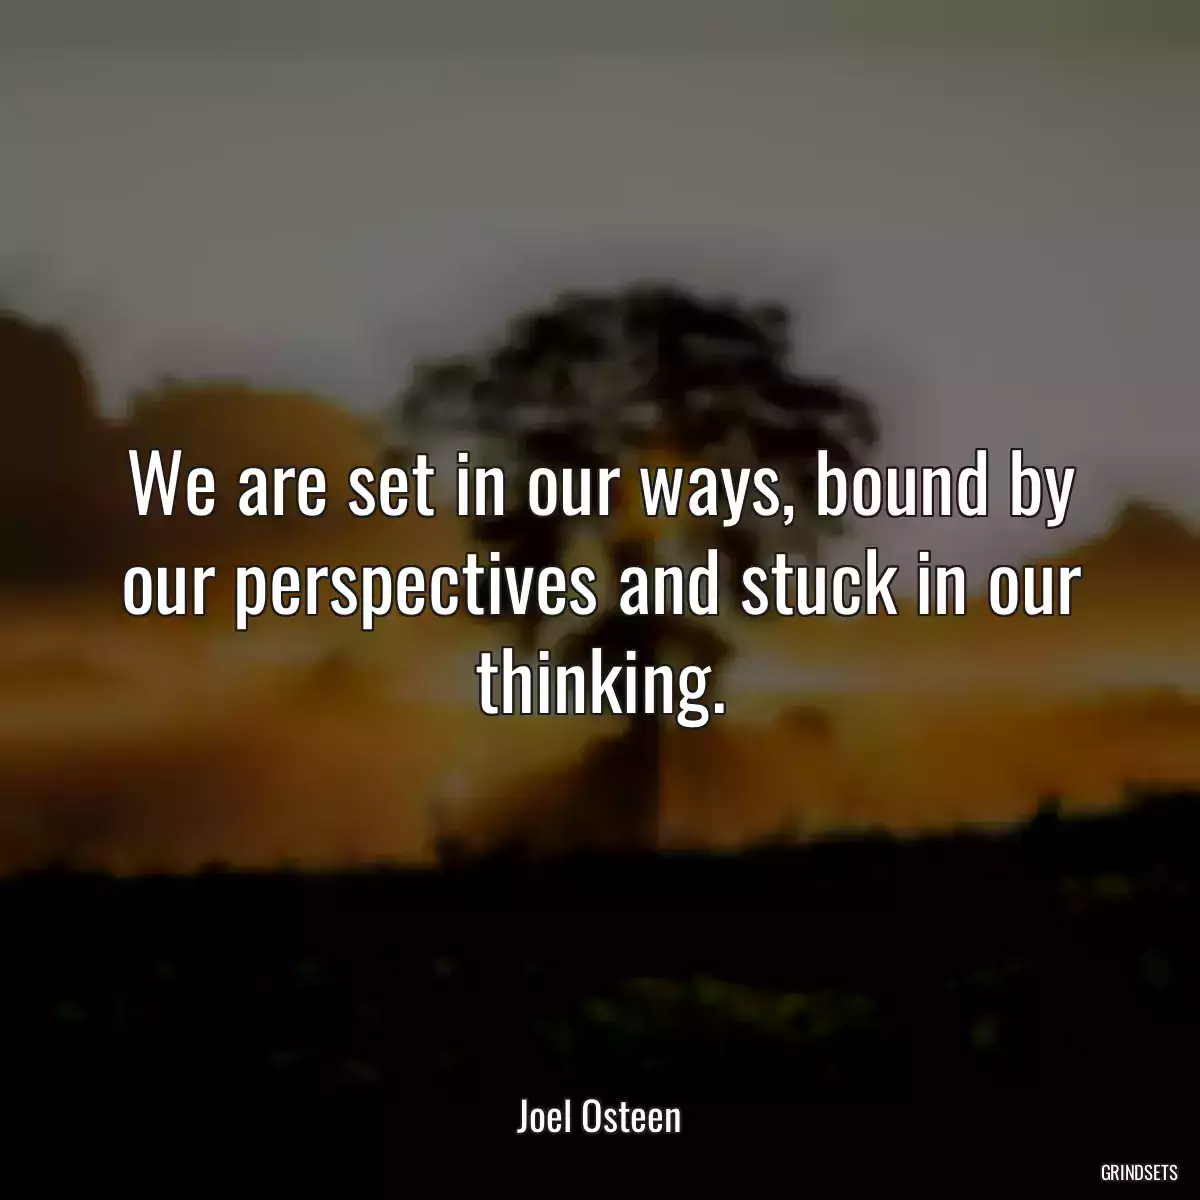 We are set in our ways, bound by our perspectives and stuck in our thinking.